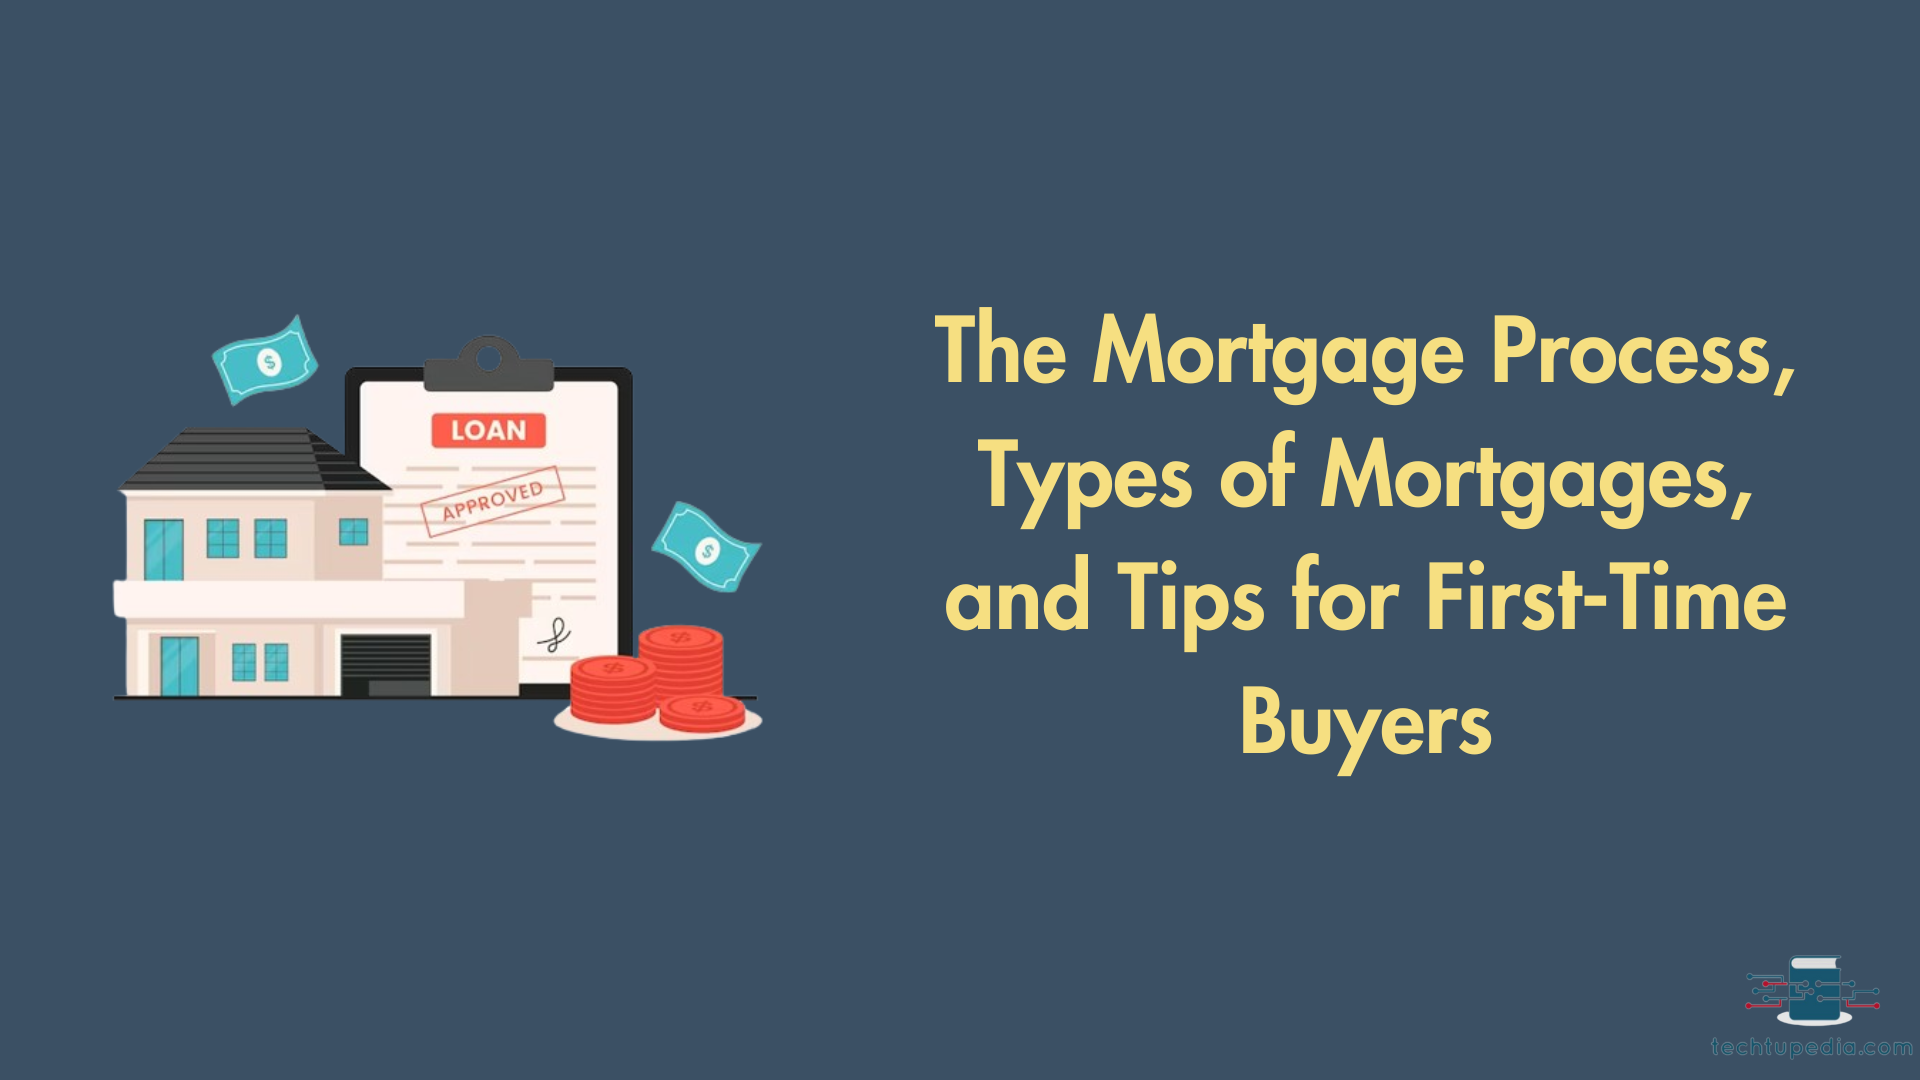 The Mortgage Process, Types of Mortgages, and Tips for First-Time Buyers